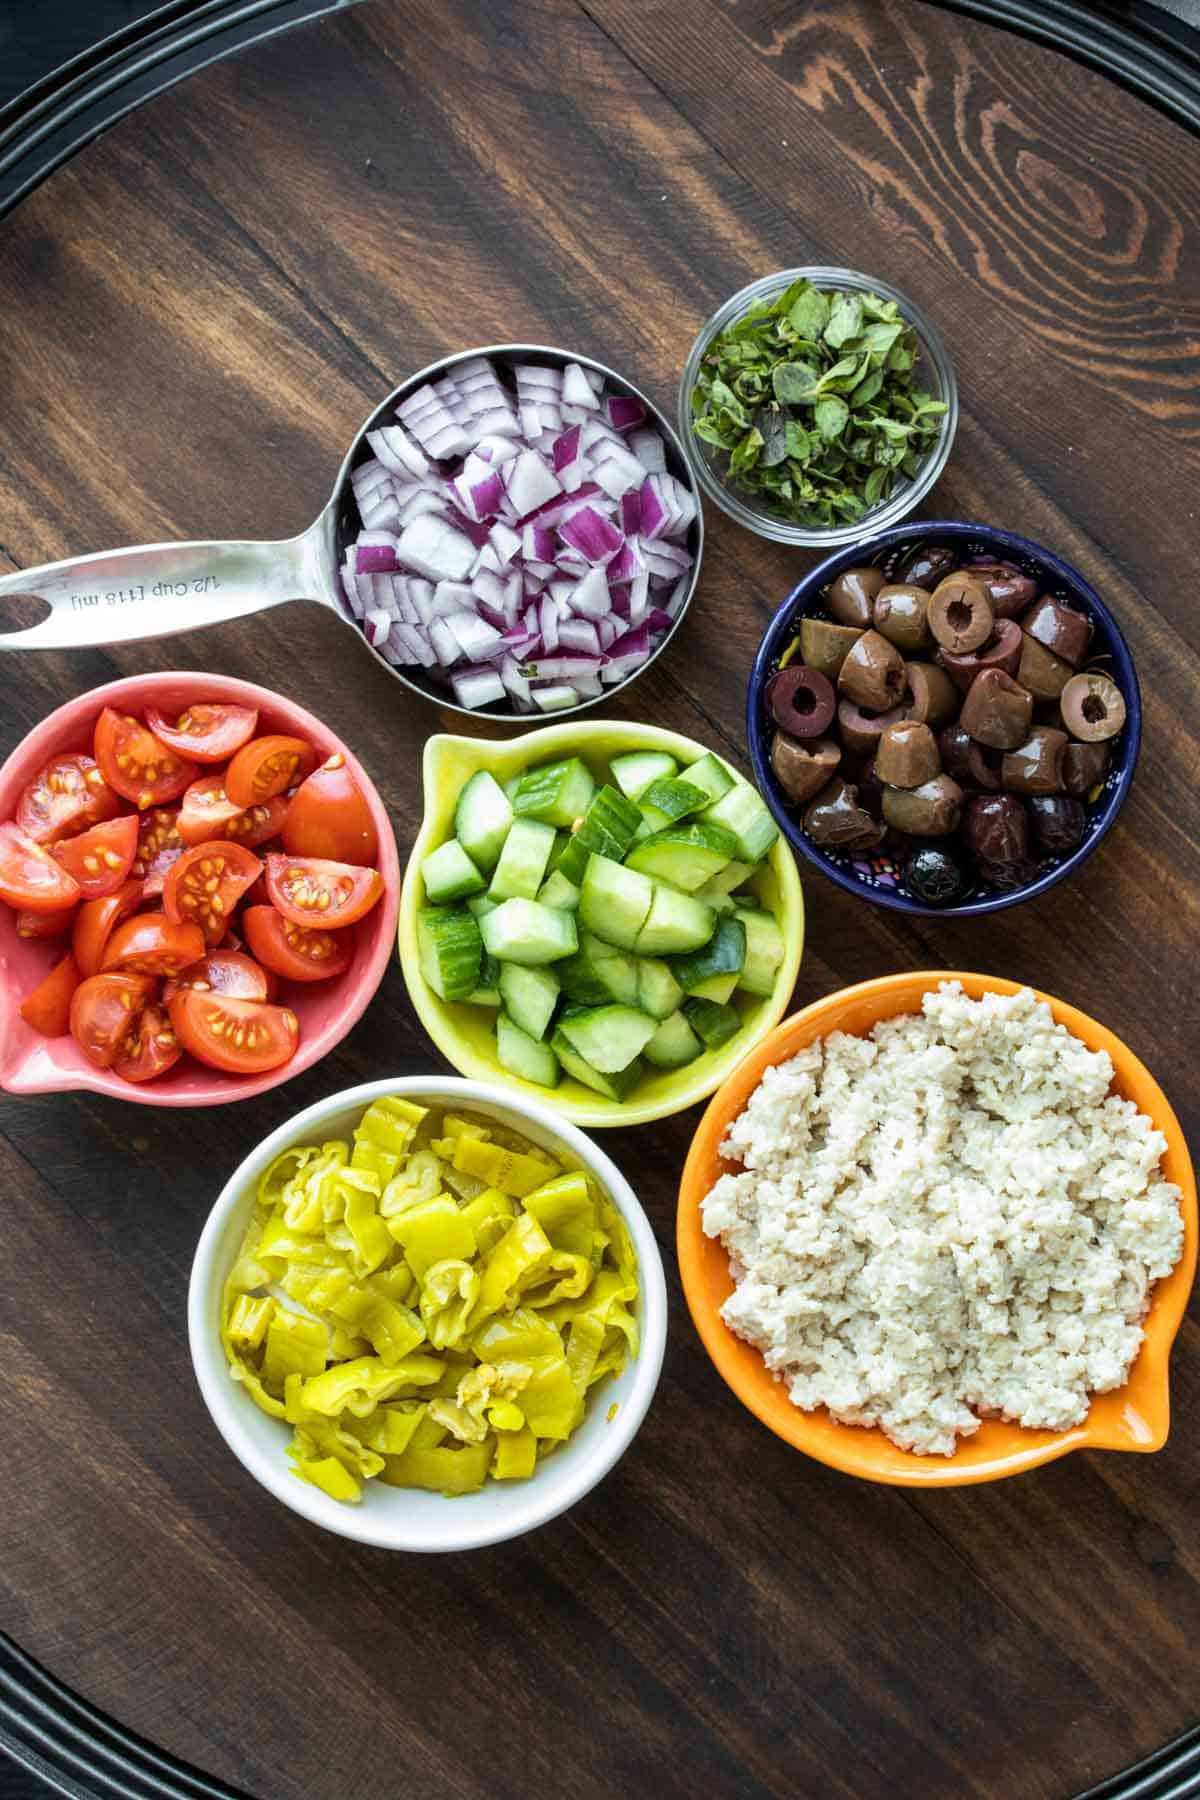 Different ingredients like veggies and vegan feta in bowls on a wooden table.